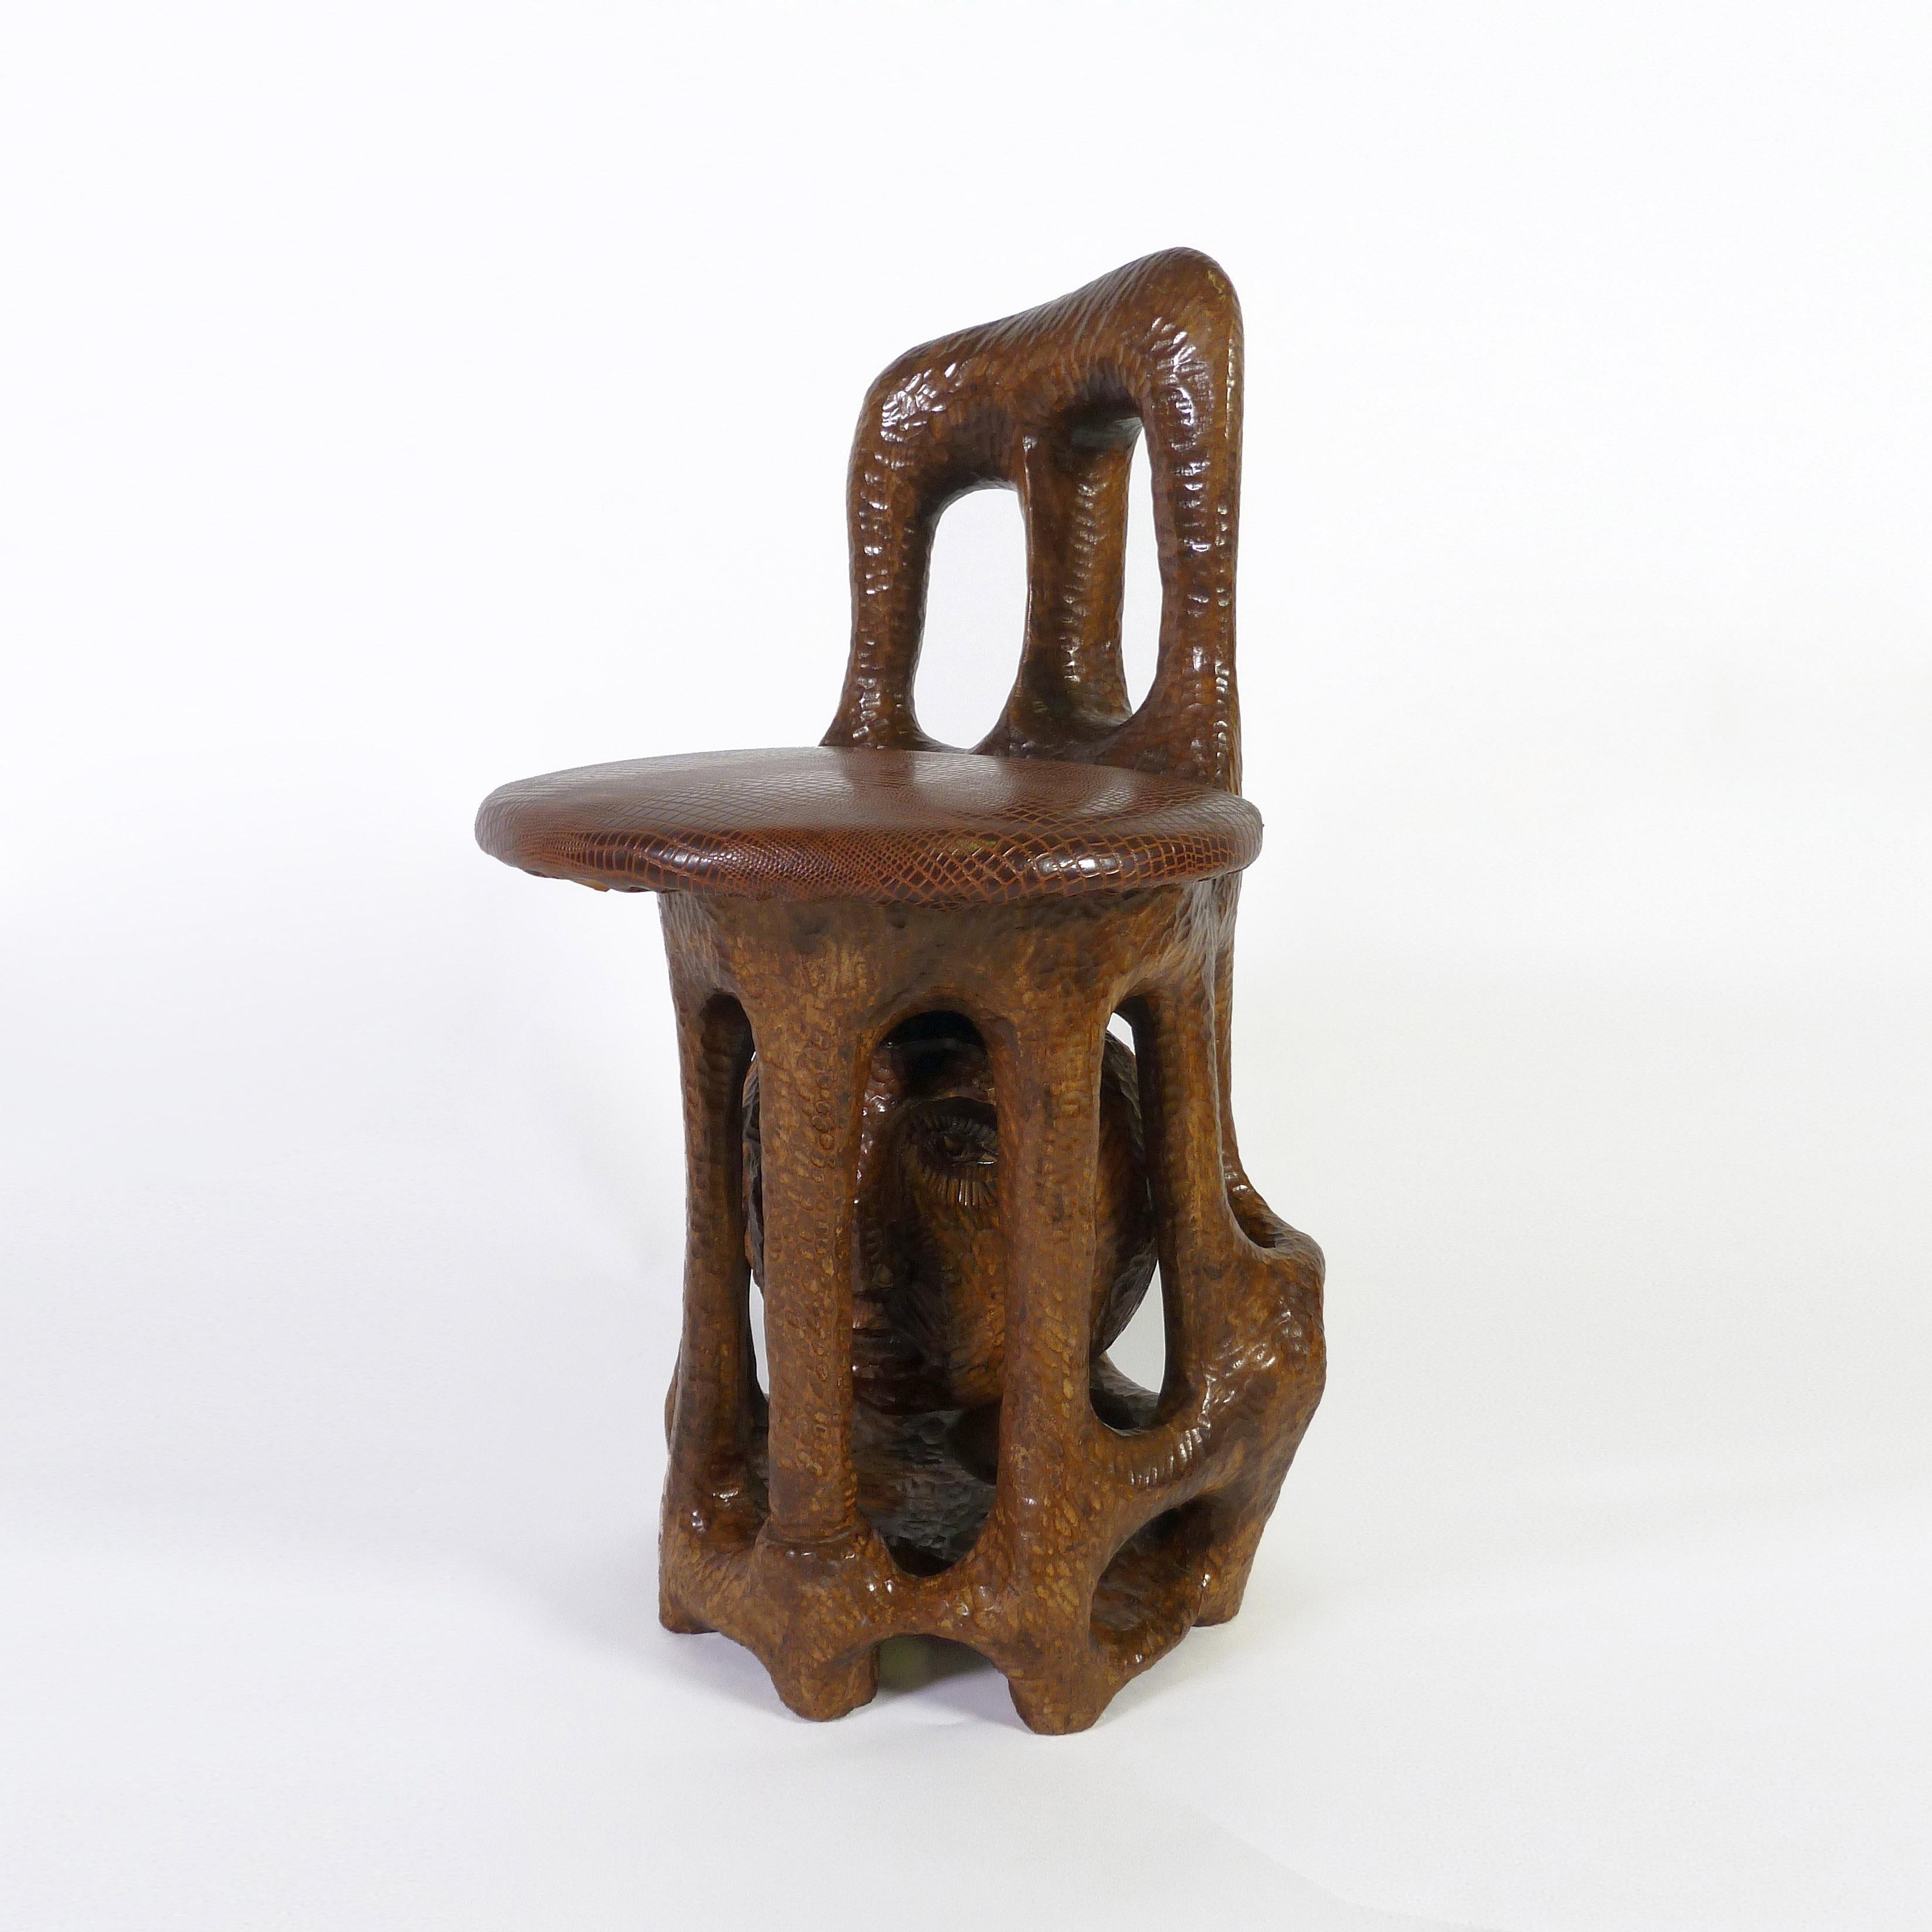 A unique museum piece with historical and political value especially for the latest BLM movement. This artwork by Sol Garson is a sculptural stained hand-carved wood chair, representing a prisoner and the struggles of Nelson Mandela as well as black